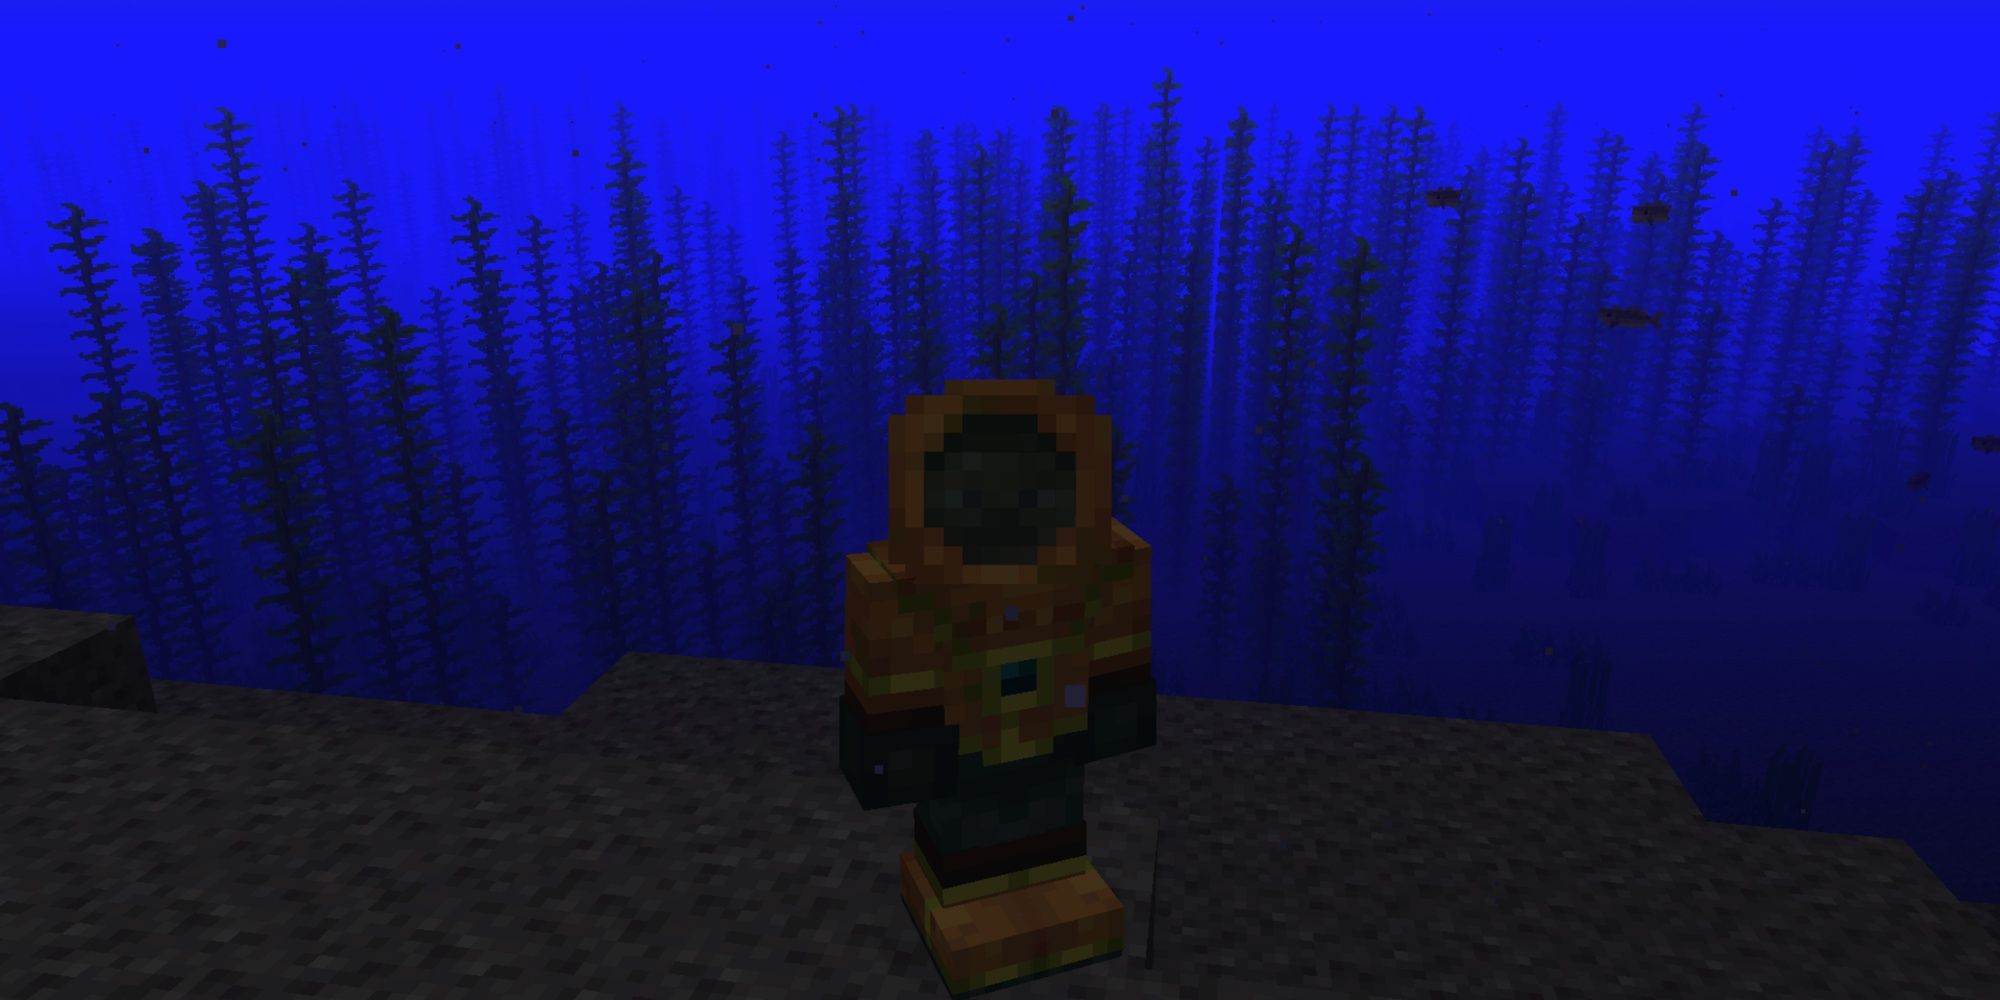 Changes for Oceans in Minecraft - More variety of loot